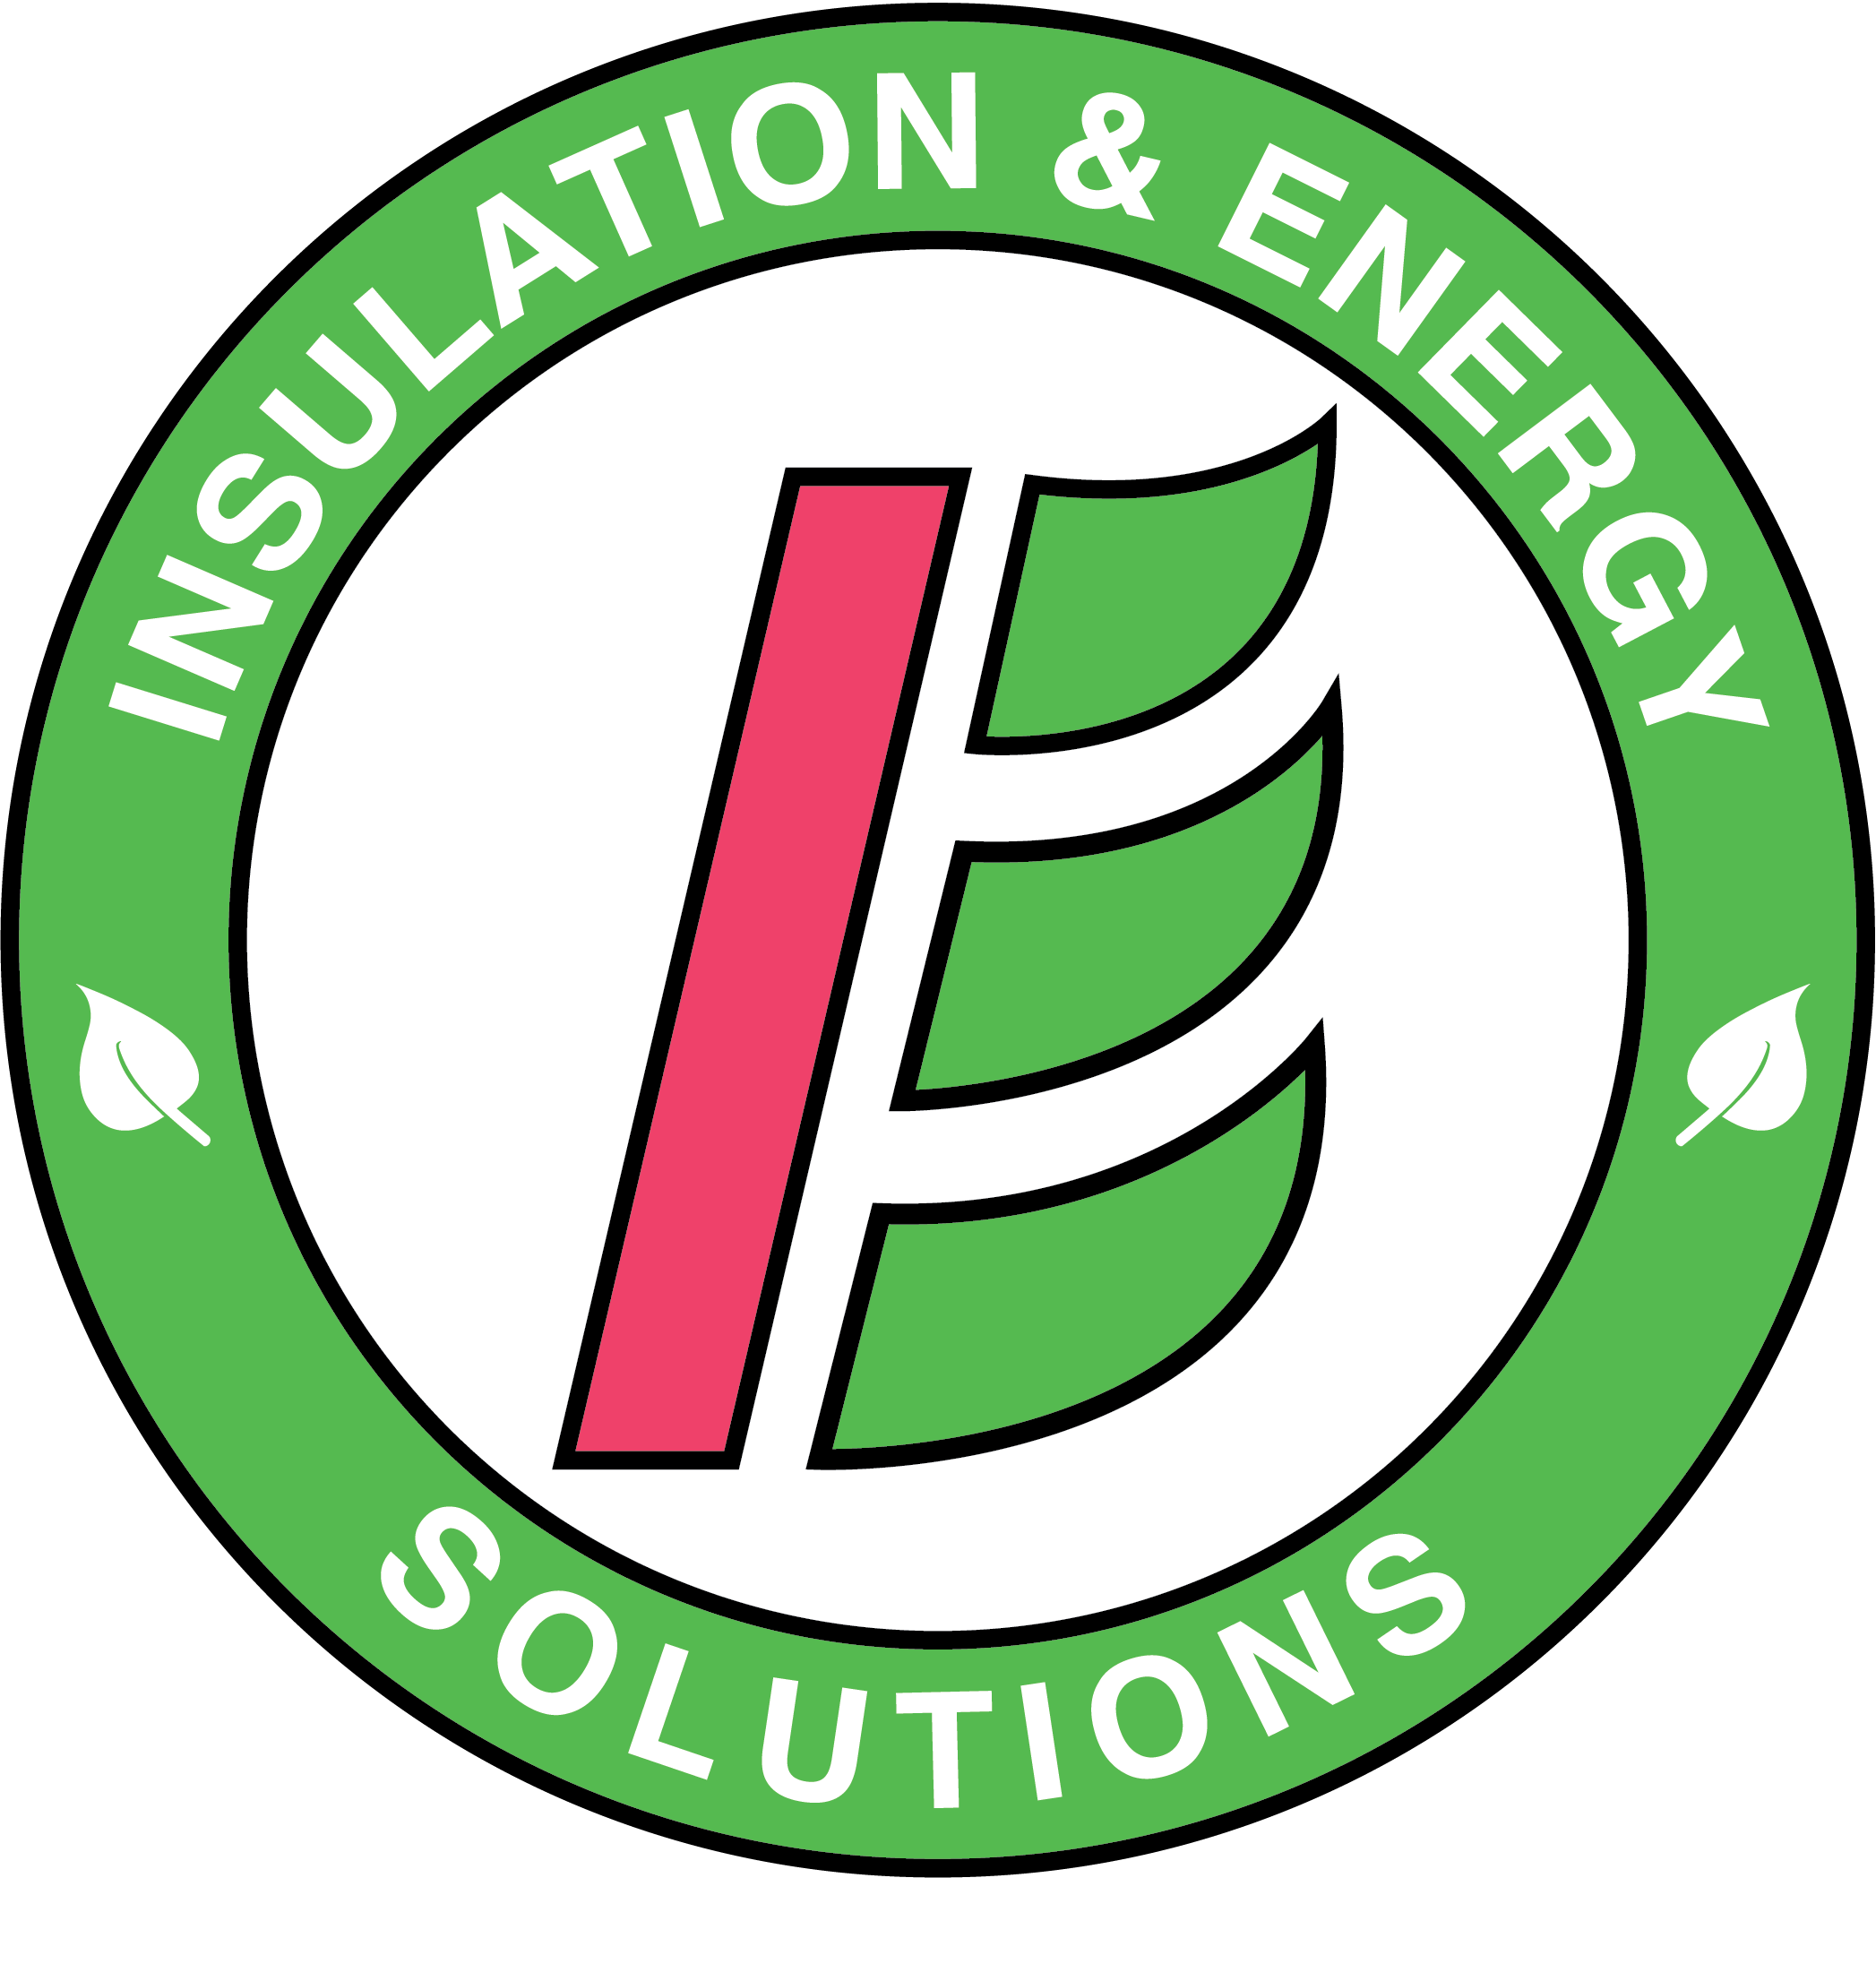 Insulation & Energy Solutions